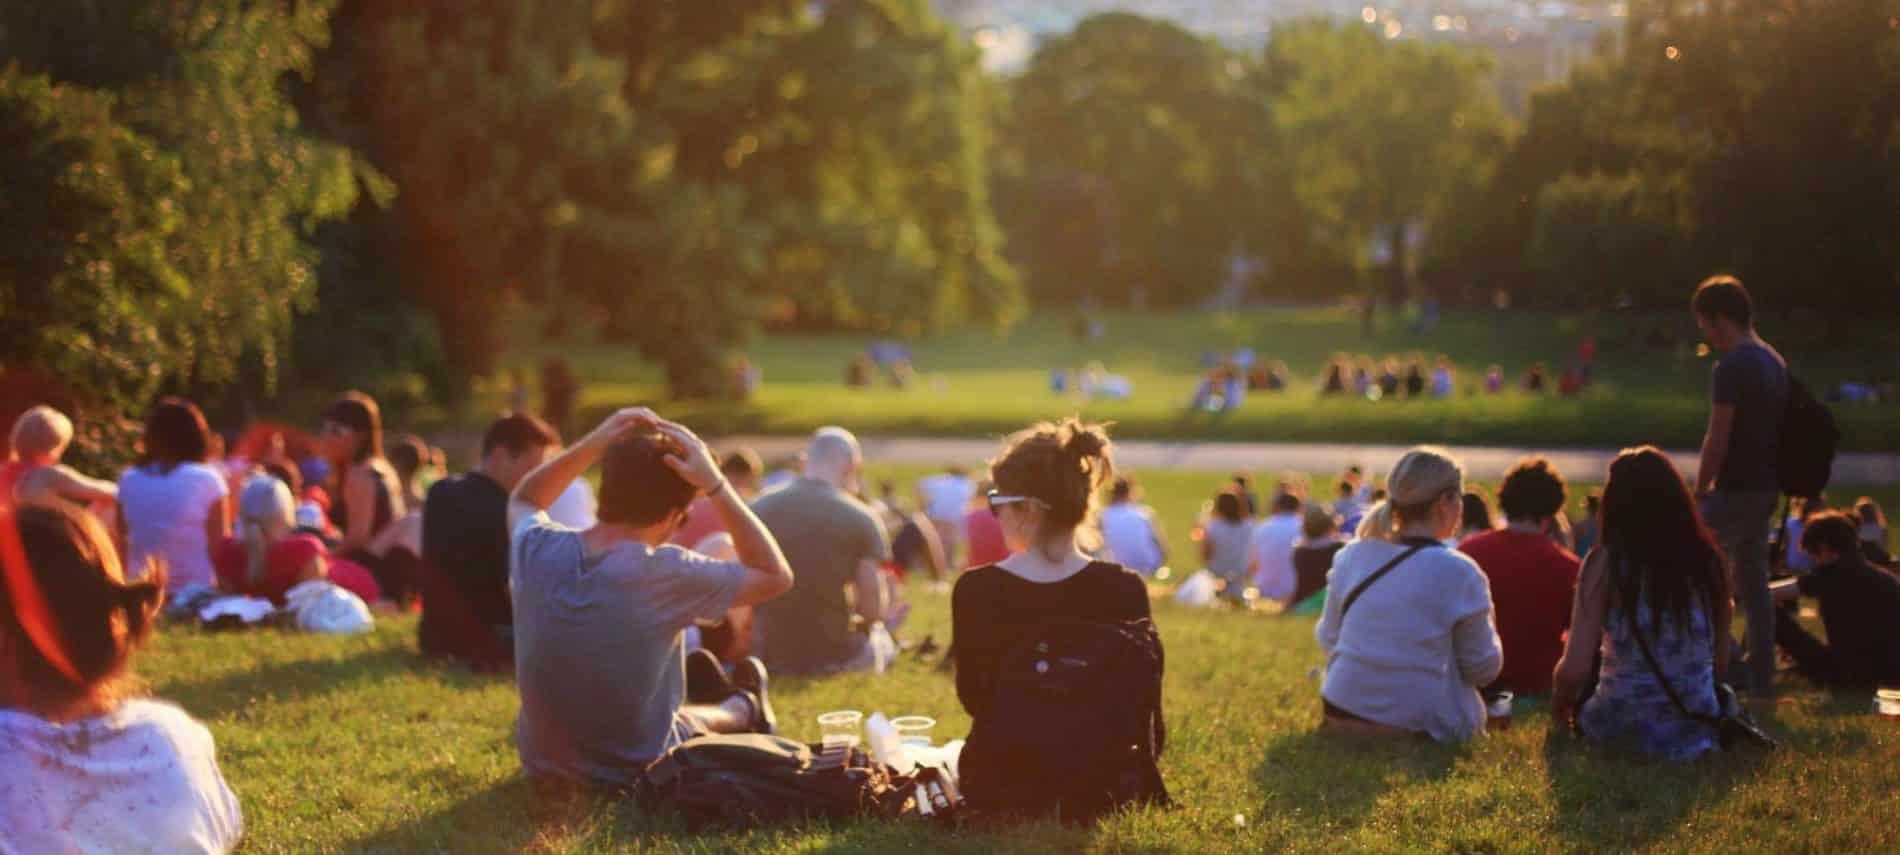 Group of people sitting on a lawn enjoying a summer concert